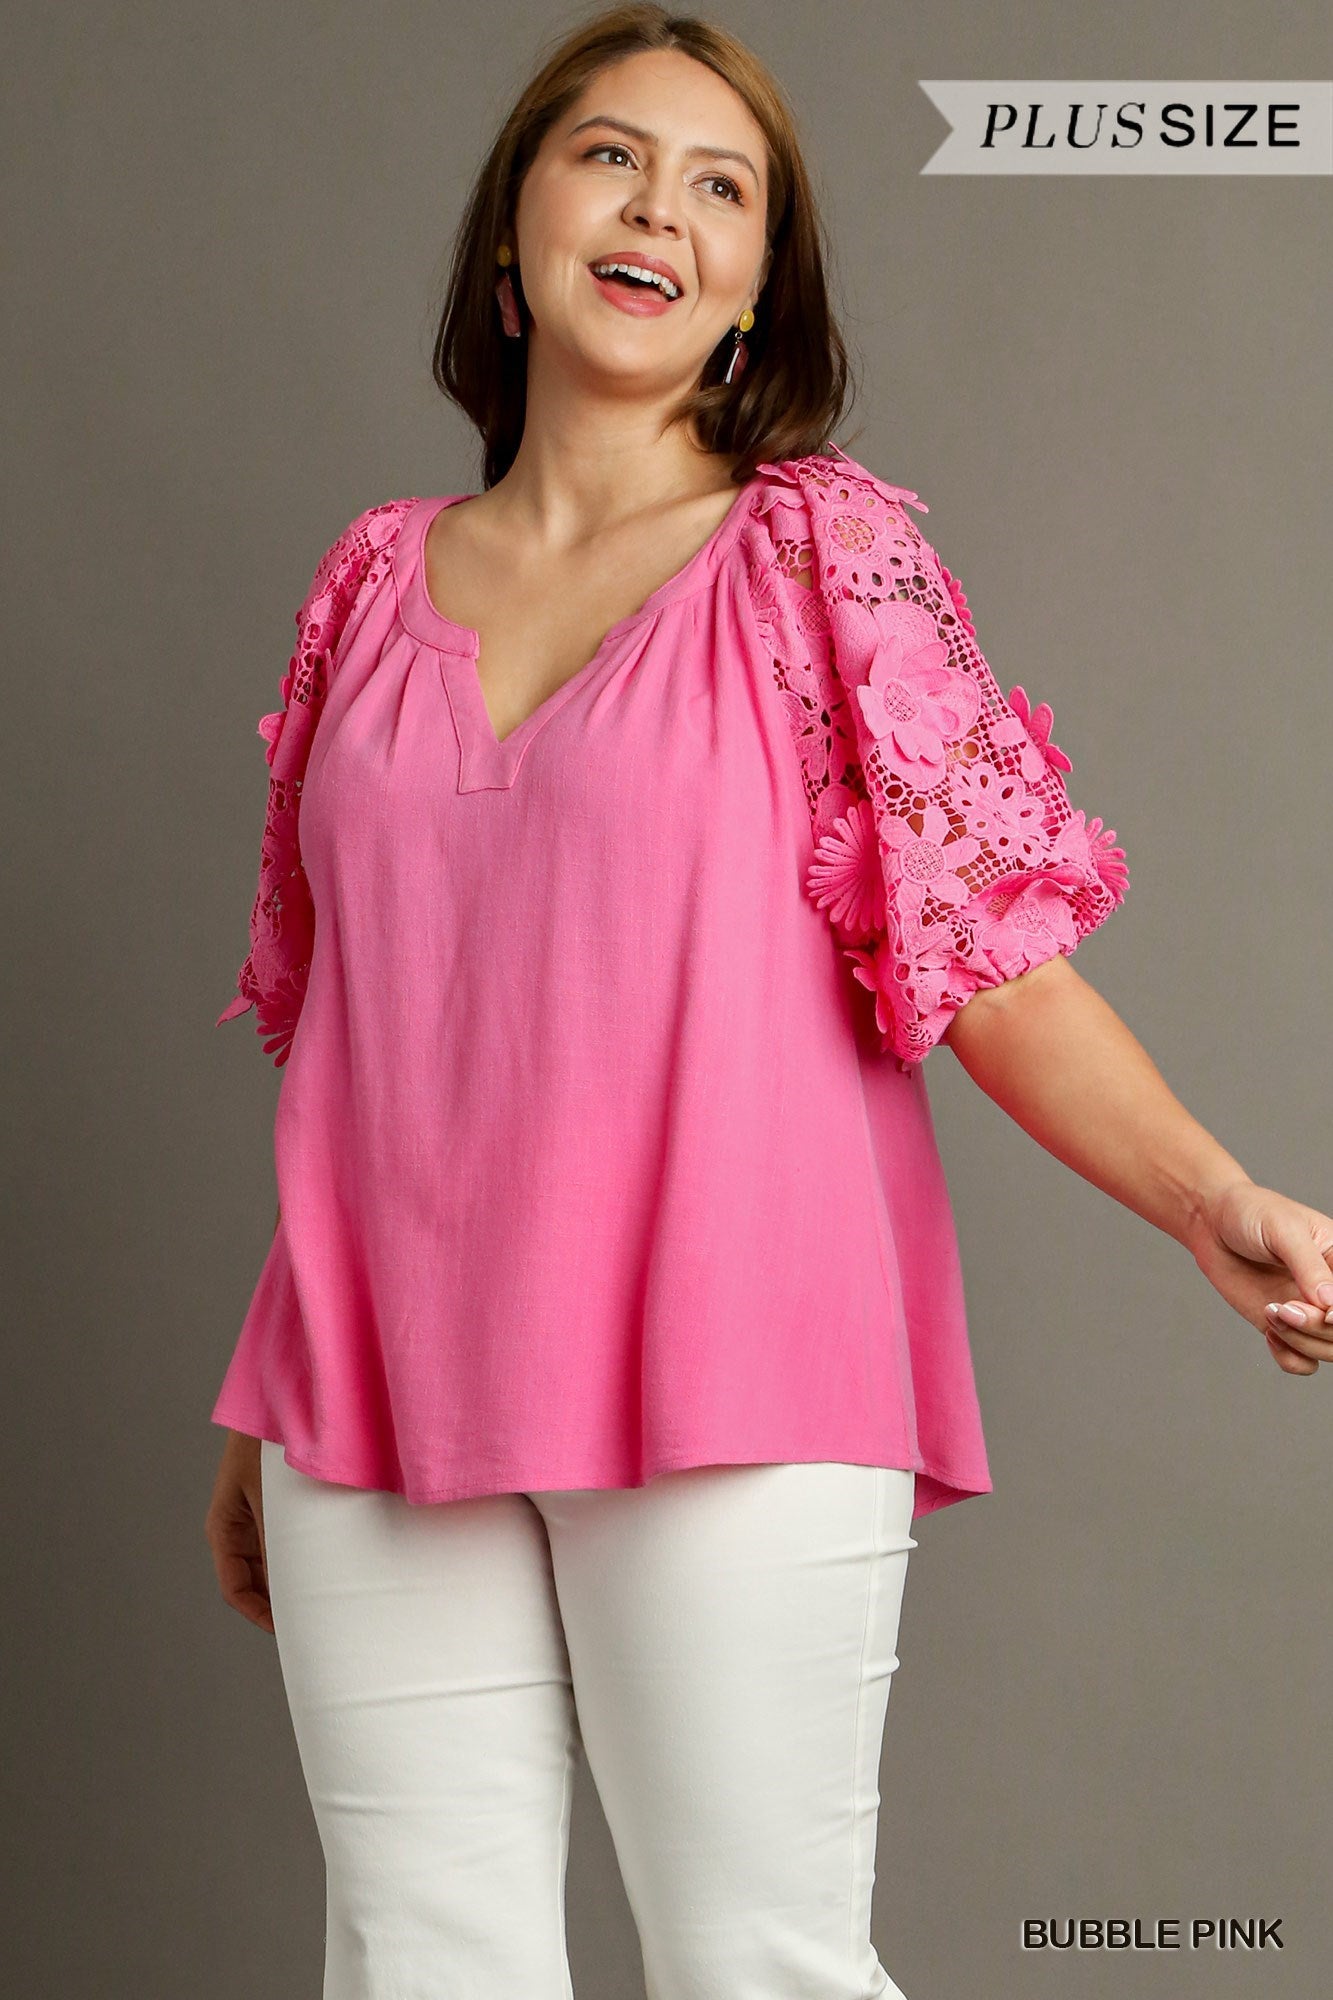 Bubble Gum Pink Linen Blend Top w/ Floral Lace Puff Sleeves